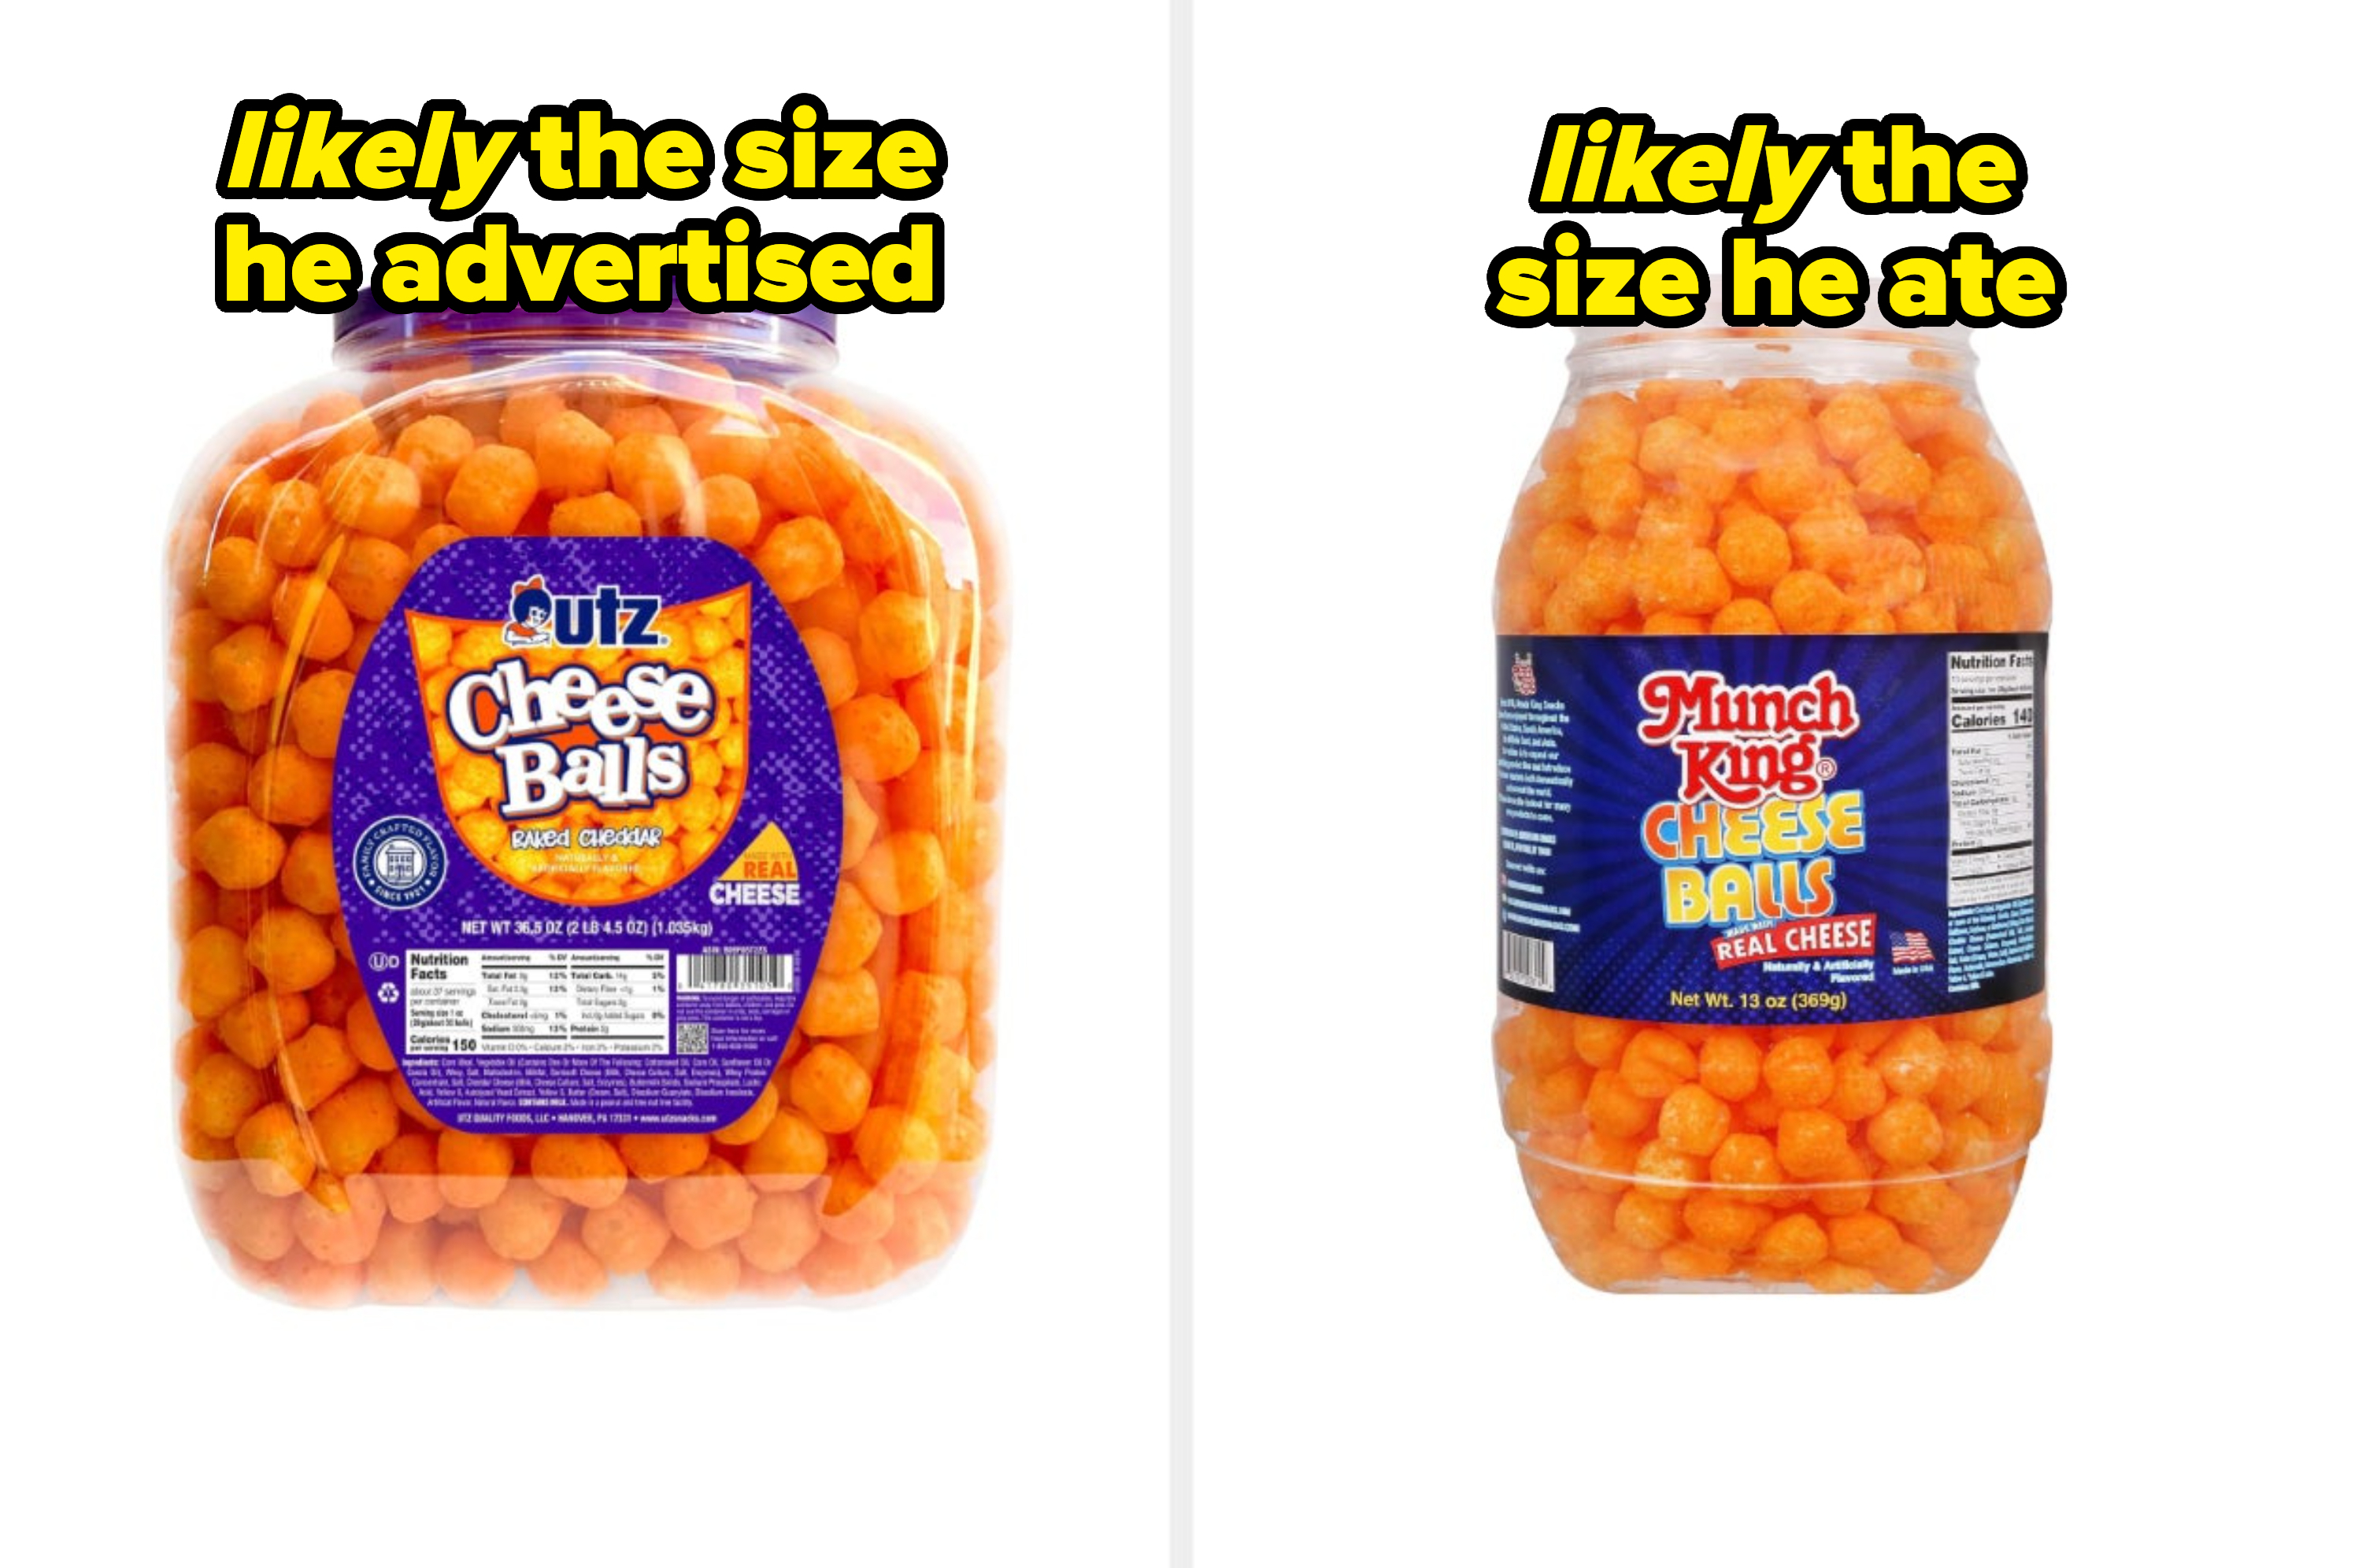 Two cheese ball jars labeled with &#x27;likely the size he advertised&#x27; and &#x27;likely the size he ate&#x27; as a humorous comparison